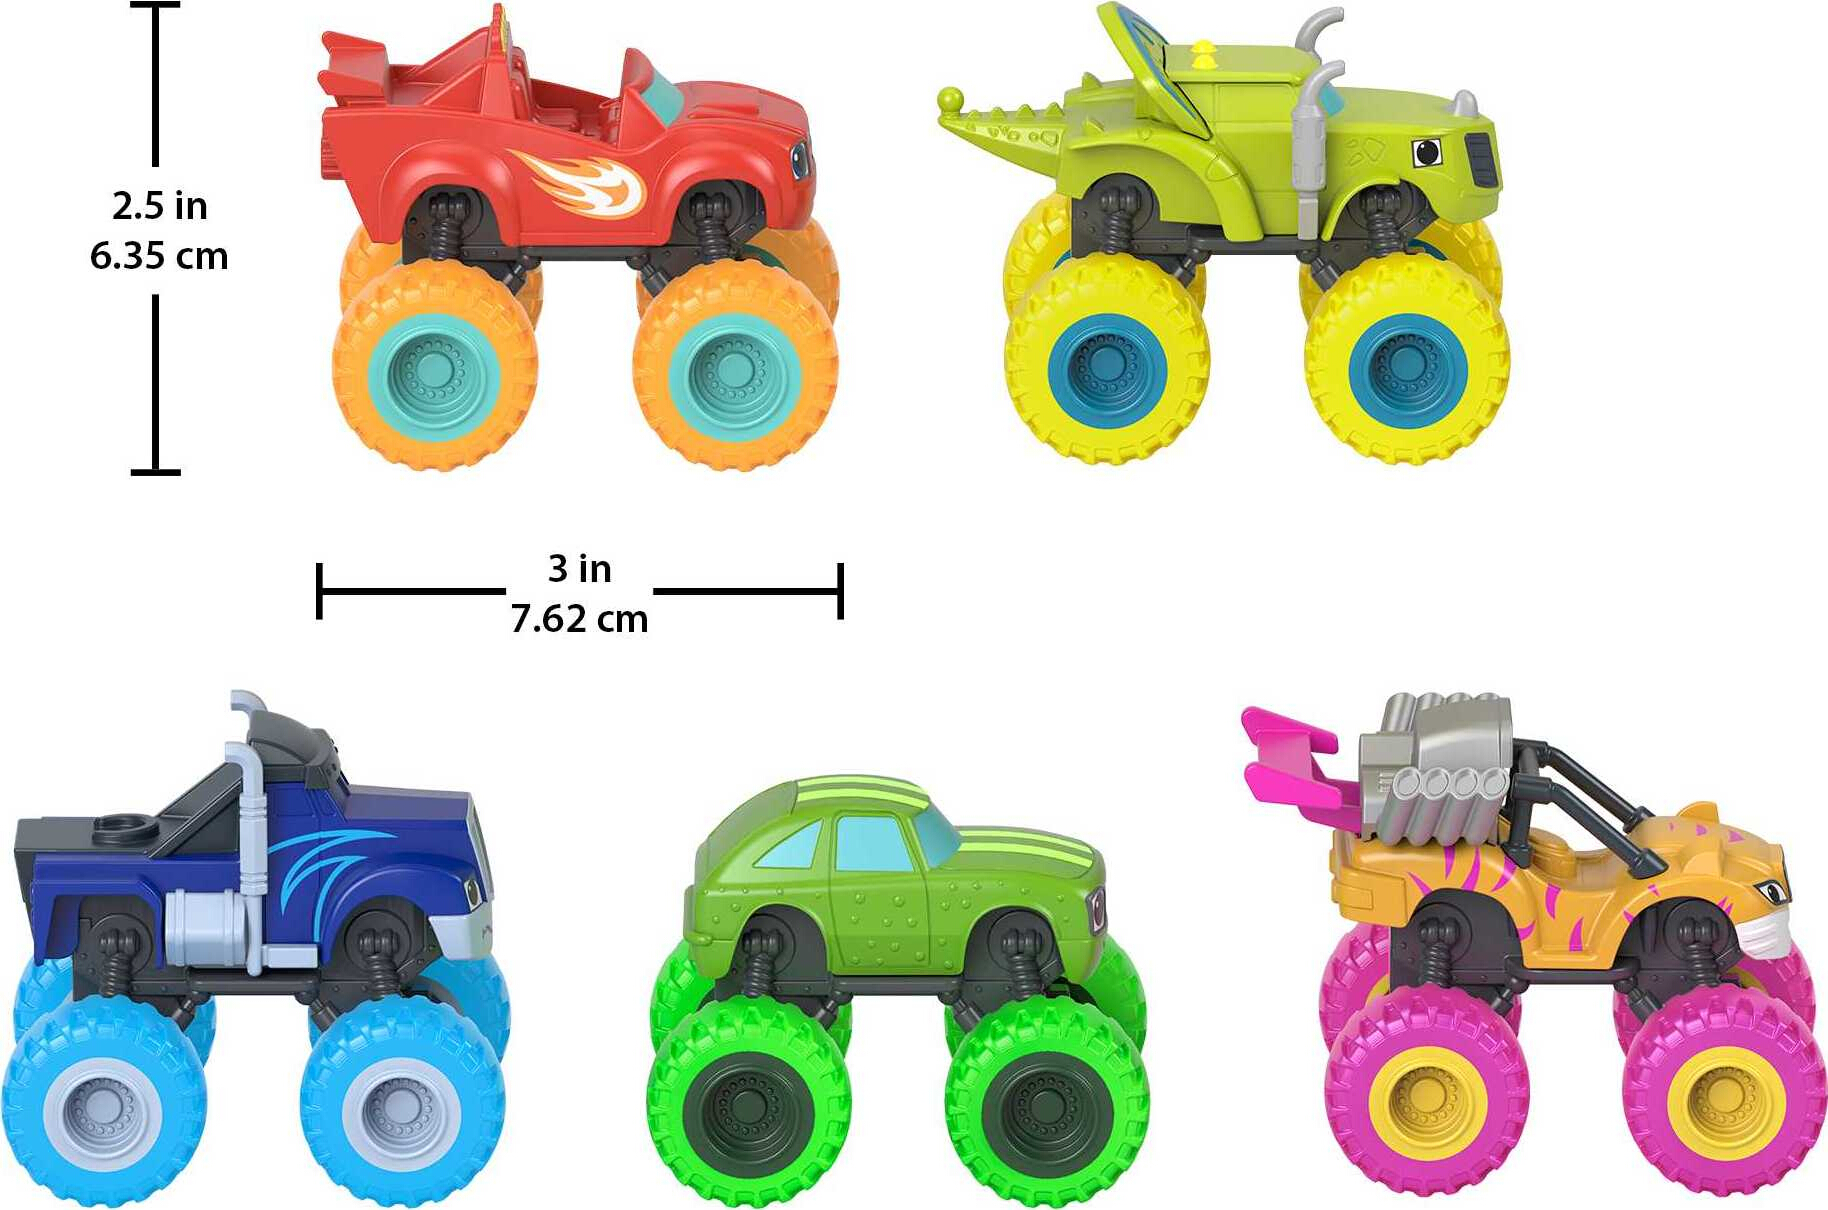 Fisher-Price Blaze and the Monster Machines Neon Wheels 5-Pack of Diecast Toy Trucks - image 2 of 6